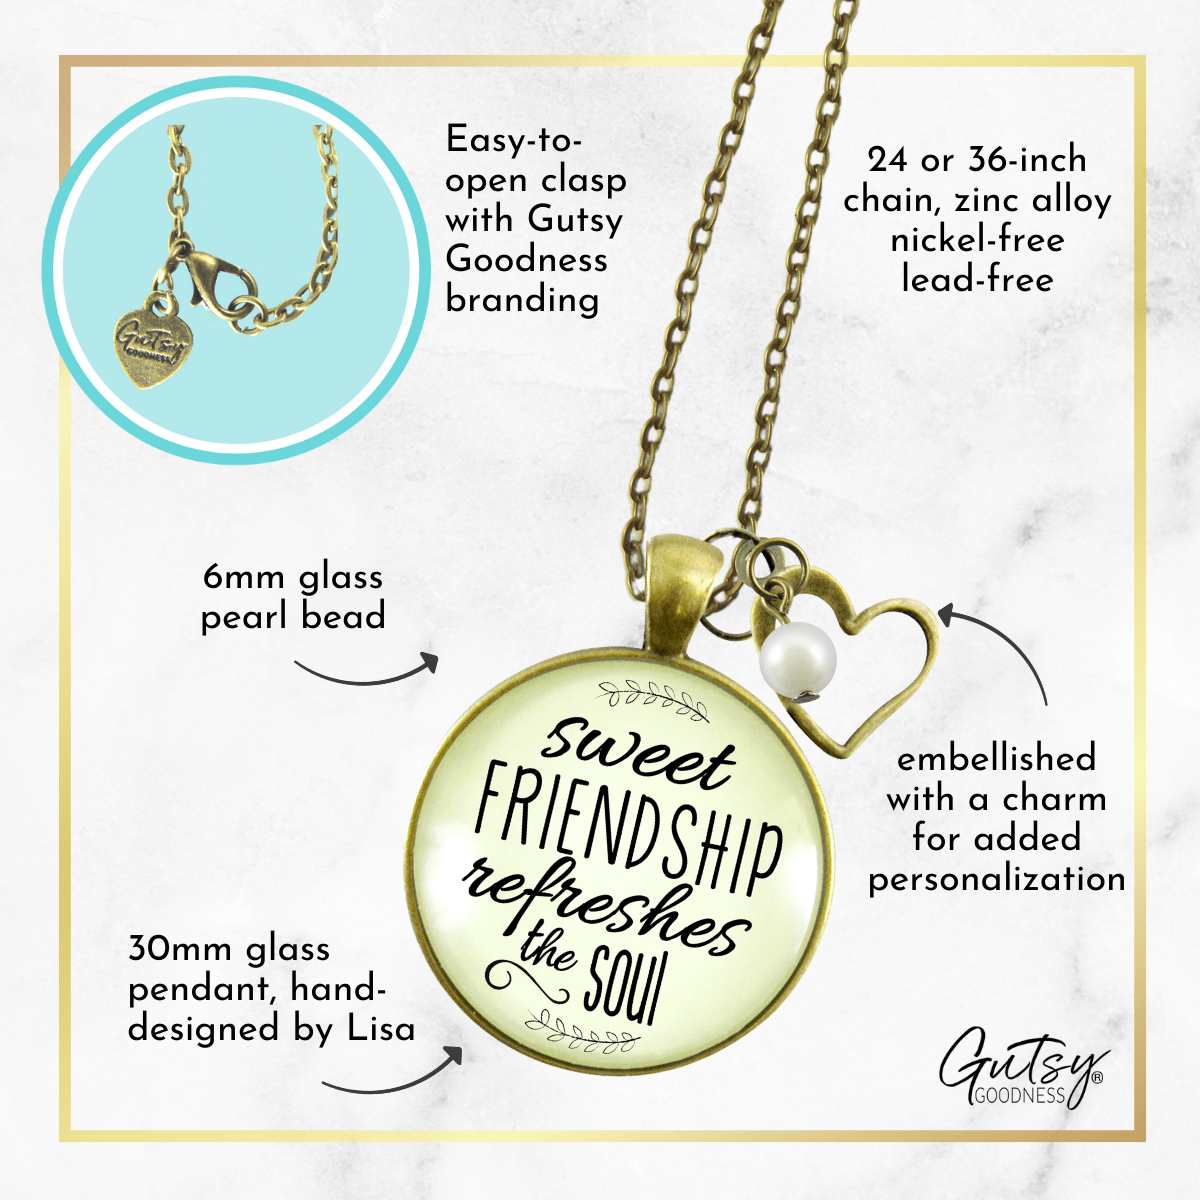 Gutsy Goodness BFF Necklace Sweet Friendship Refreshes Soul Inspirational Pendant Jewelry - Gutsy Goodness;Bff Necklace Sweet Friendship Refreshes Soul Inspirational Pendant Jewelry - Gutsy Goodness Handmade Jewelry Gifts